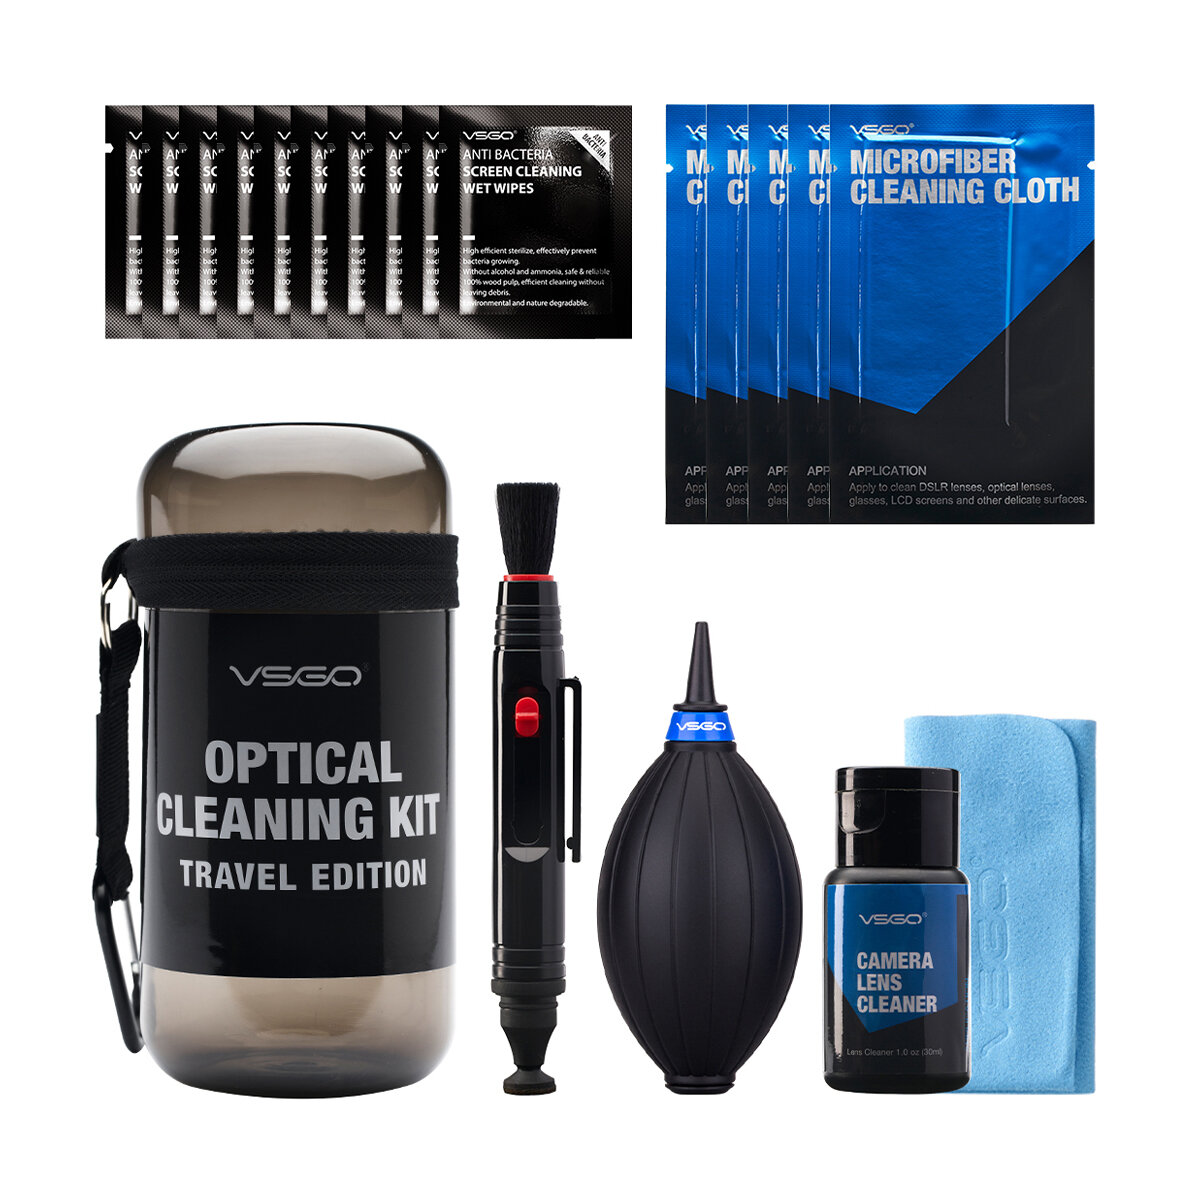 VSGO DKL-15 Portable Camera Lens Cleaning Kits 19 in 1 Optical Cleaning Travel Kit for Camera Mobile